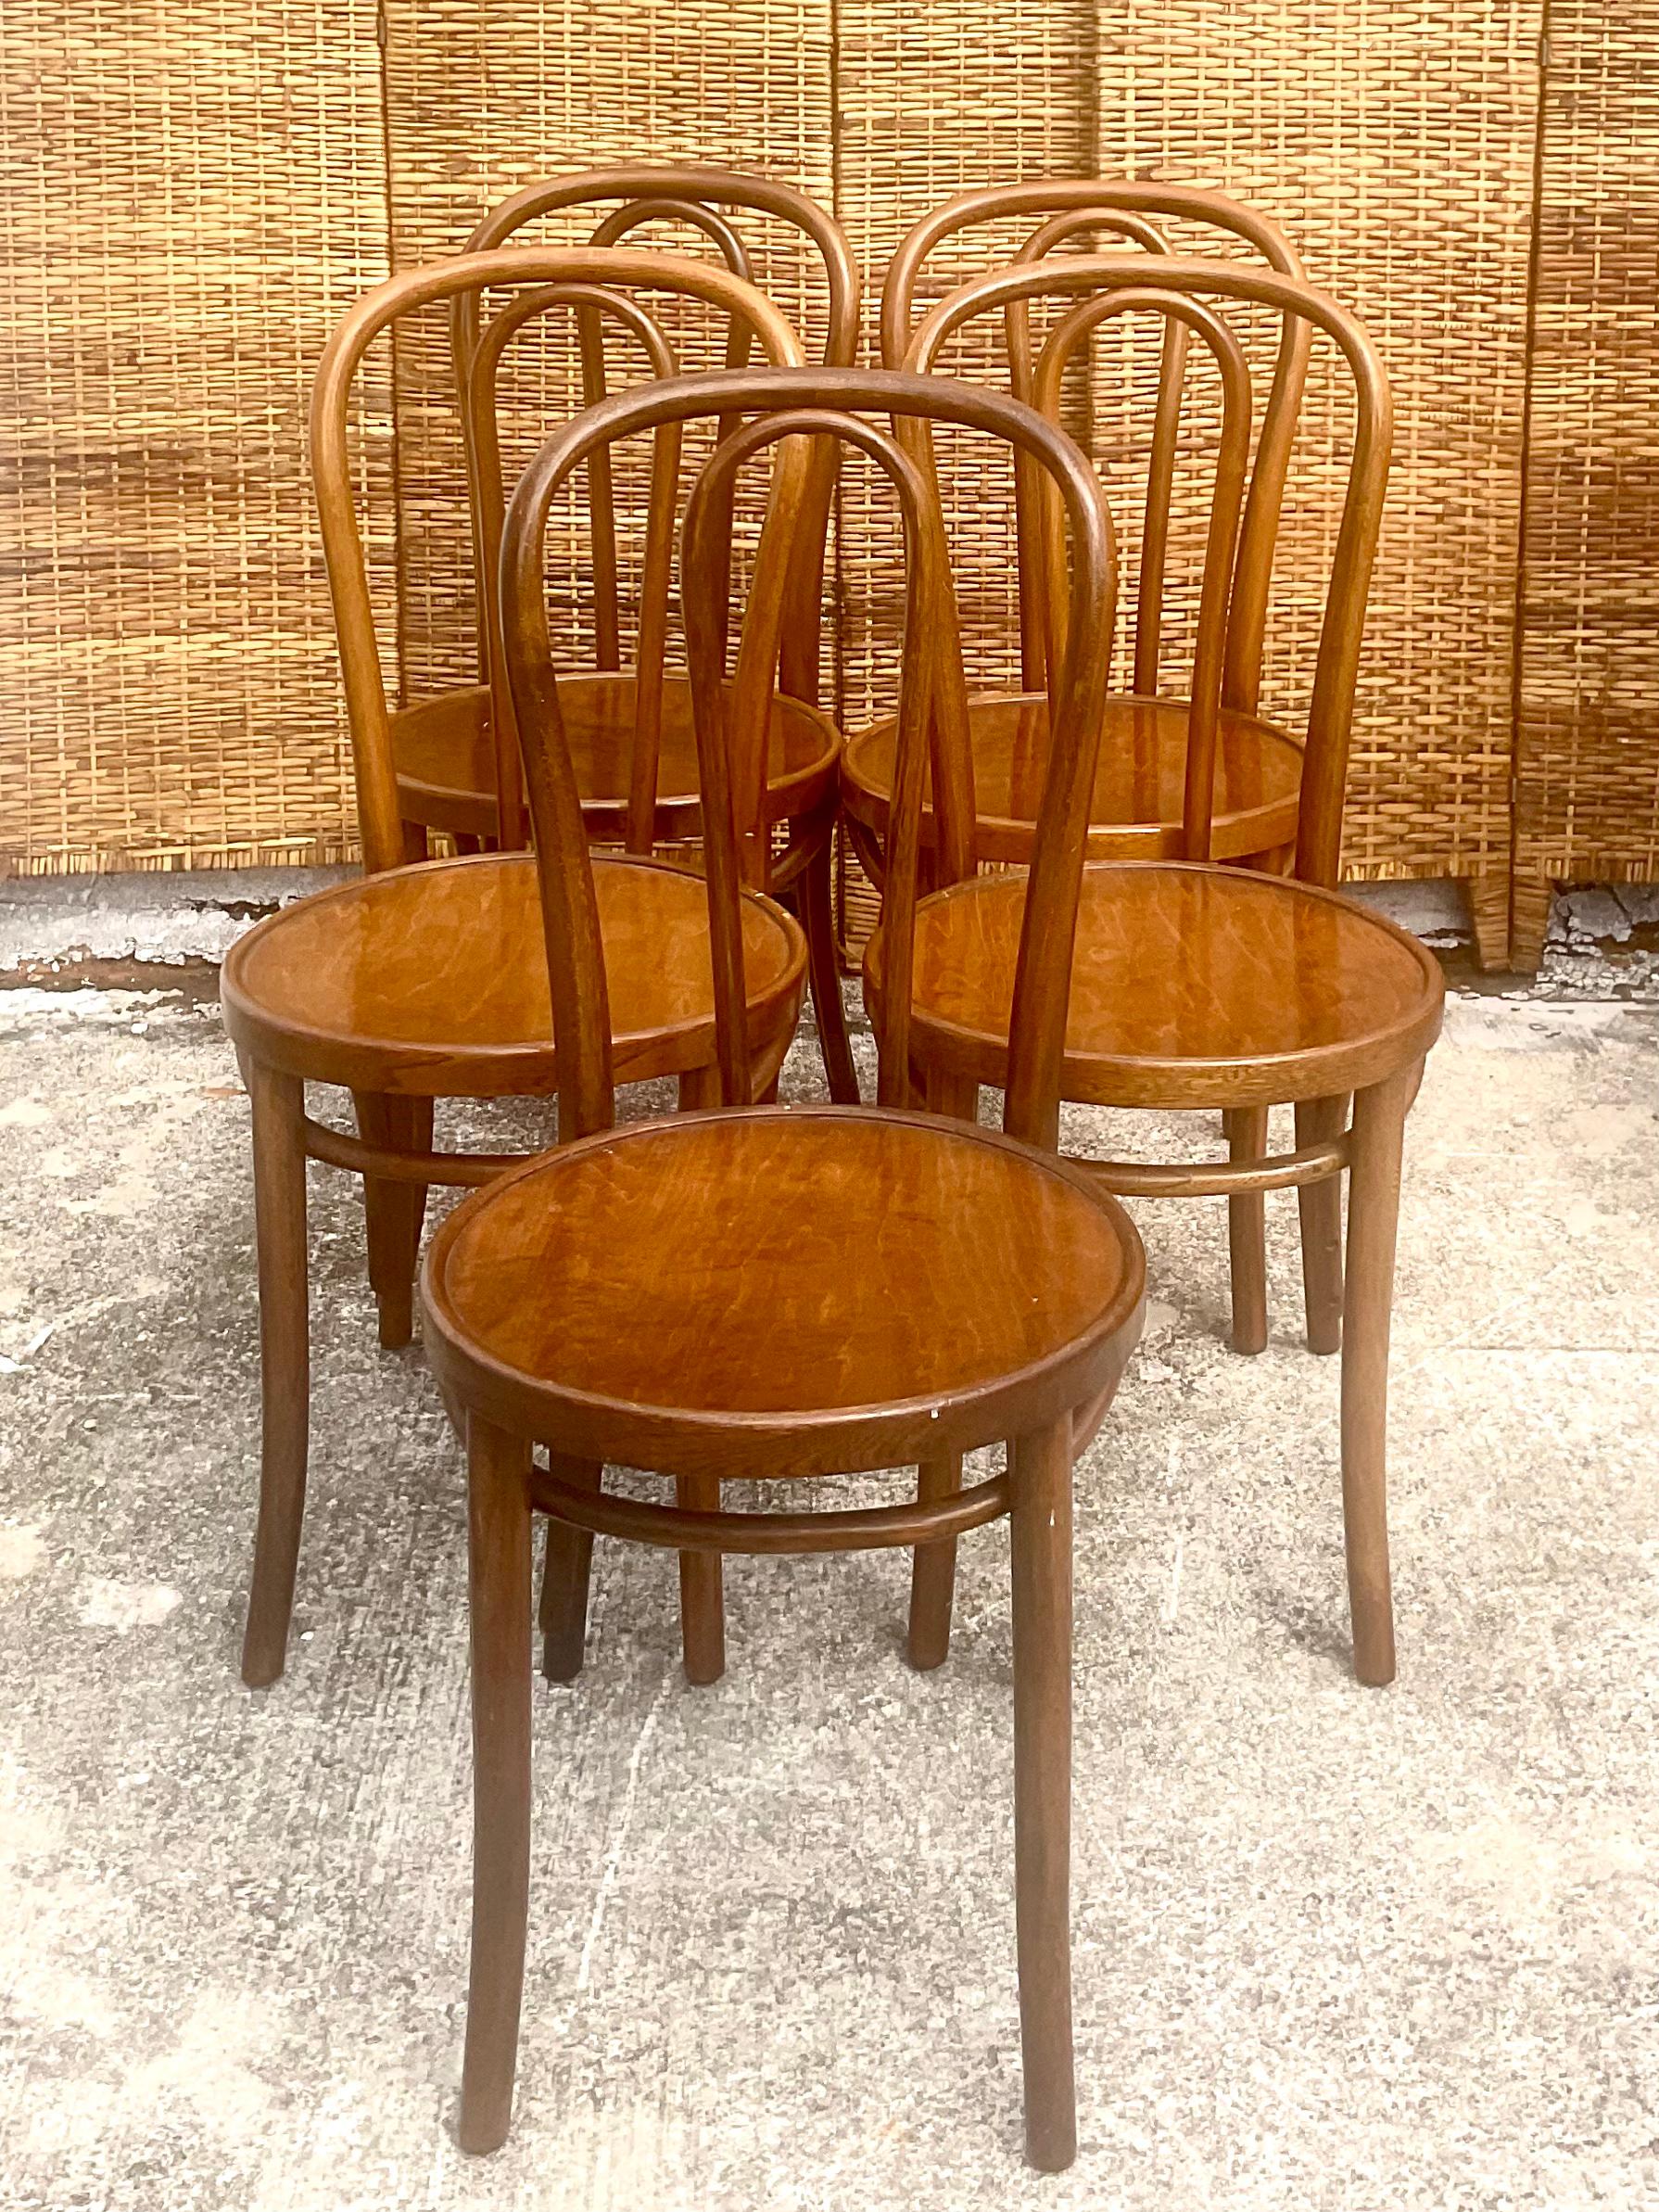 Fantastic set of 5 Thonet dining chairs. Beautiful bent wood design with wooden seats. In great shape with original tags on four of the five chairs. Acquired from a Palm Beach estate.